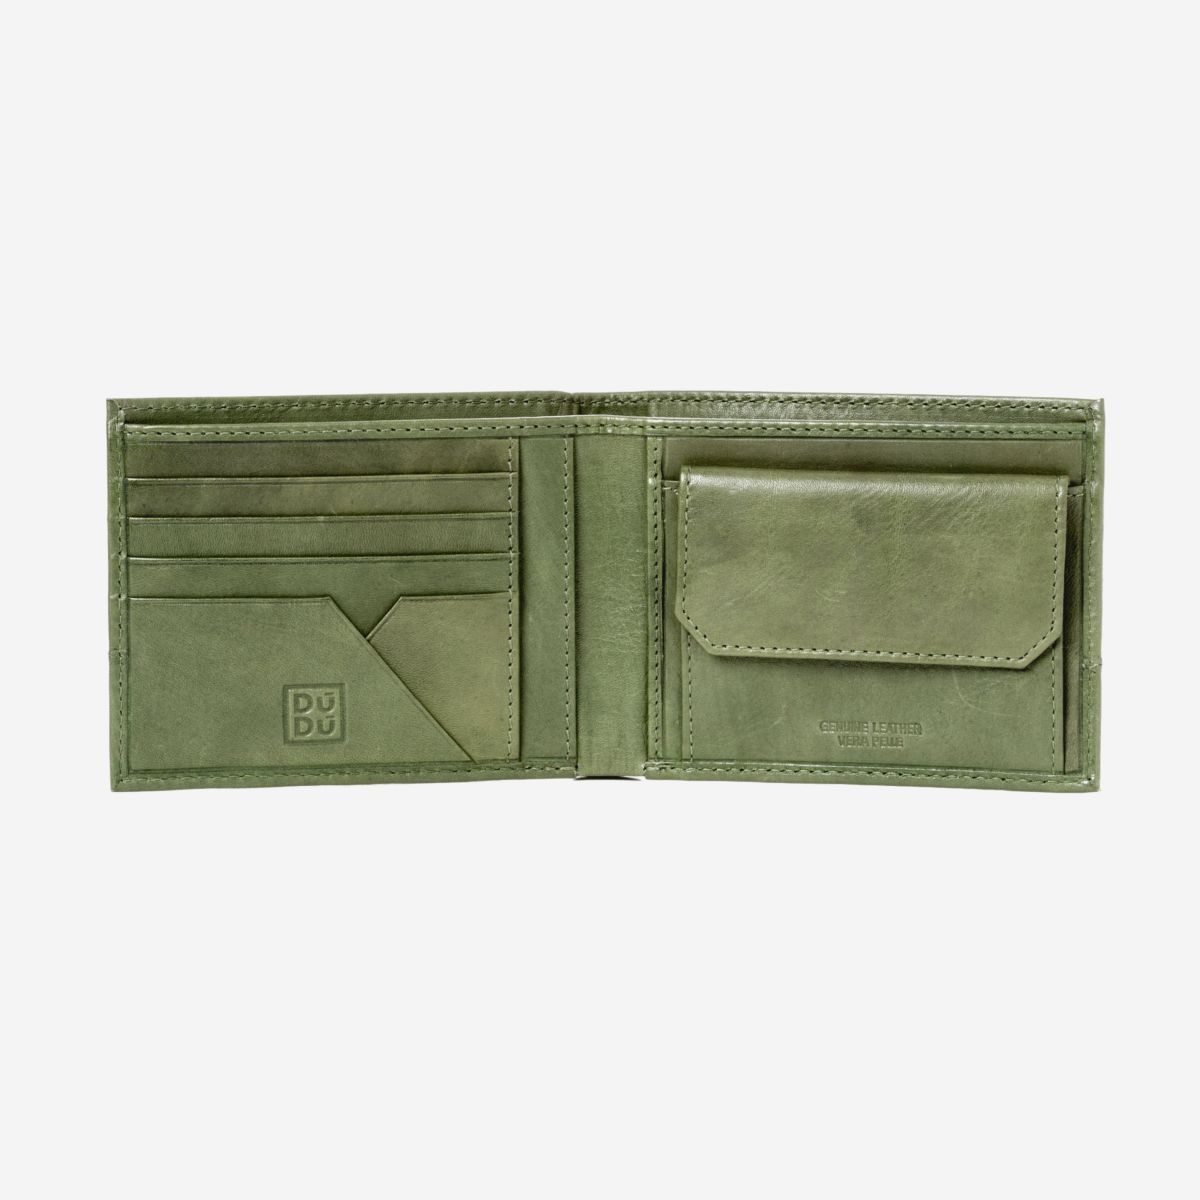 DuDu Mens Leather Wallet with Coin Pocket - Green